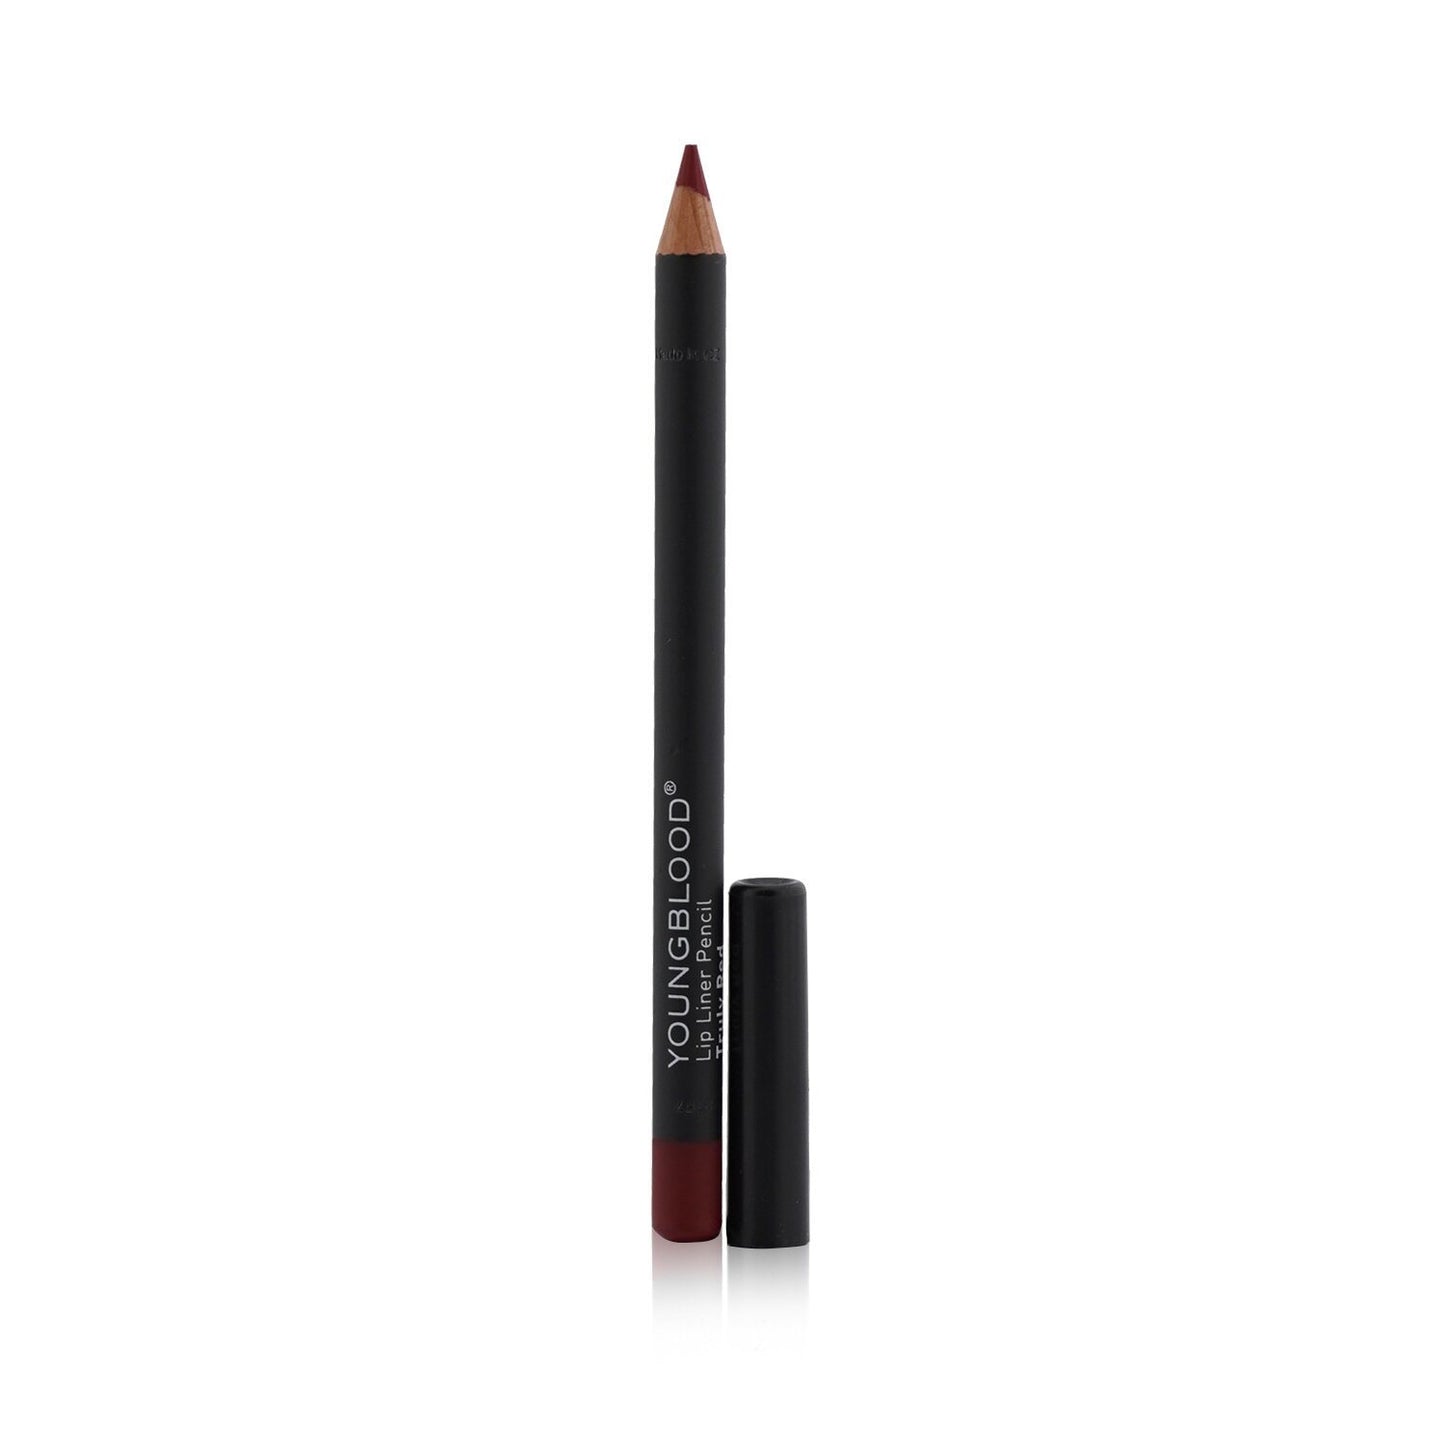 YOUNGBLOOD - Lip Liner Pencil - Truly Red 13008 1.1g/0.04oz